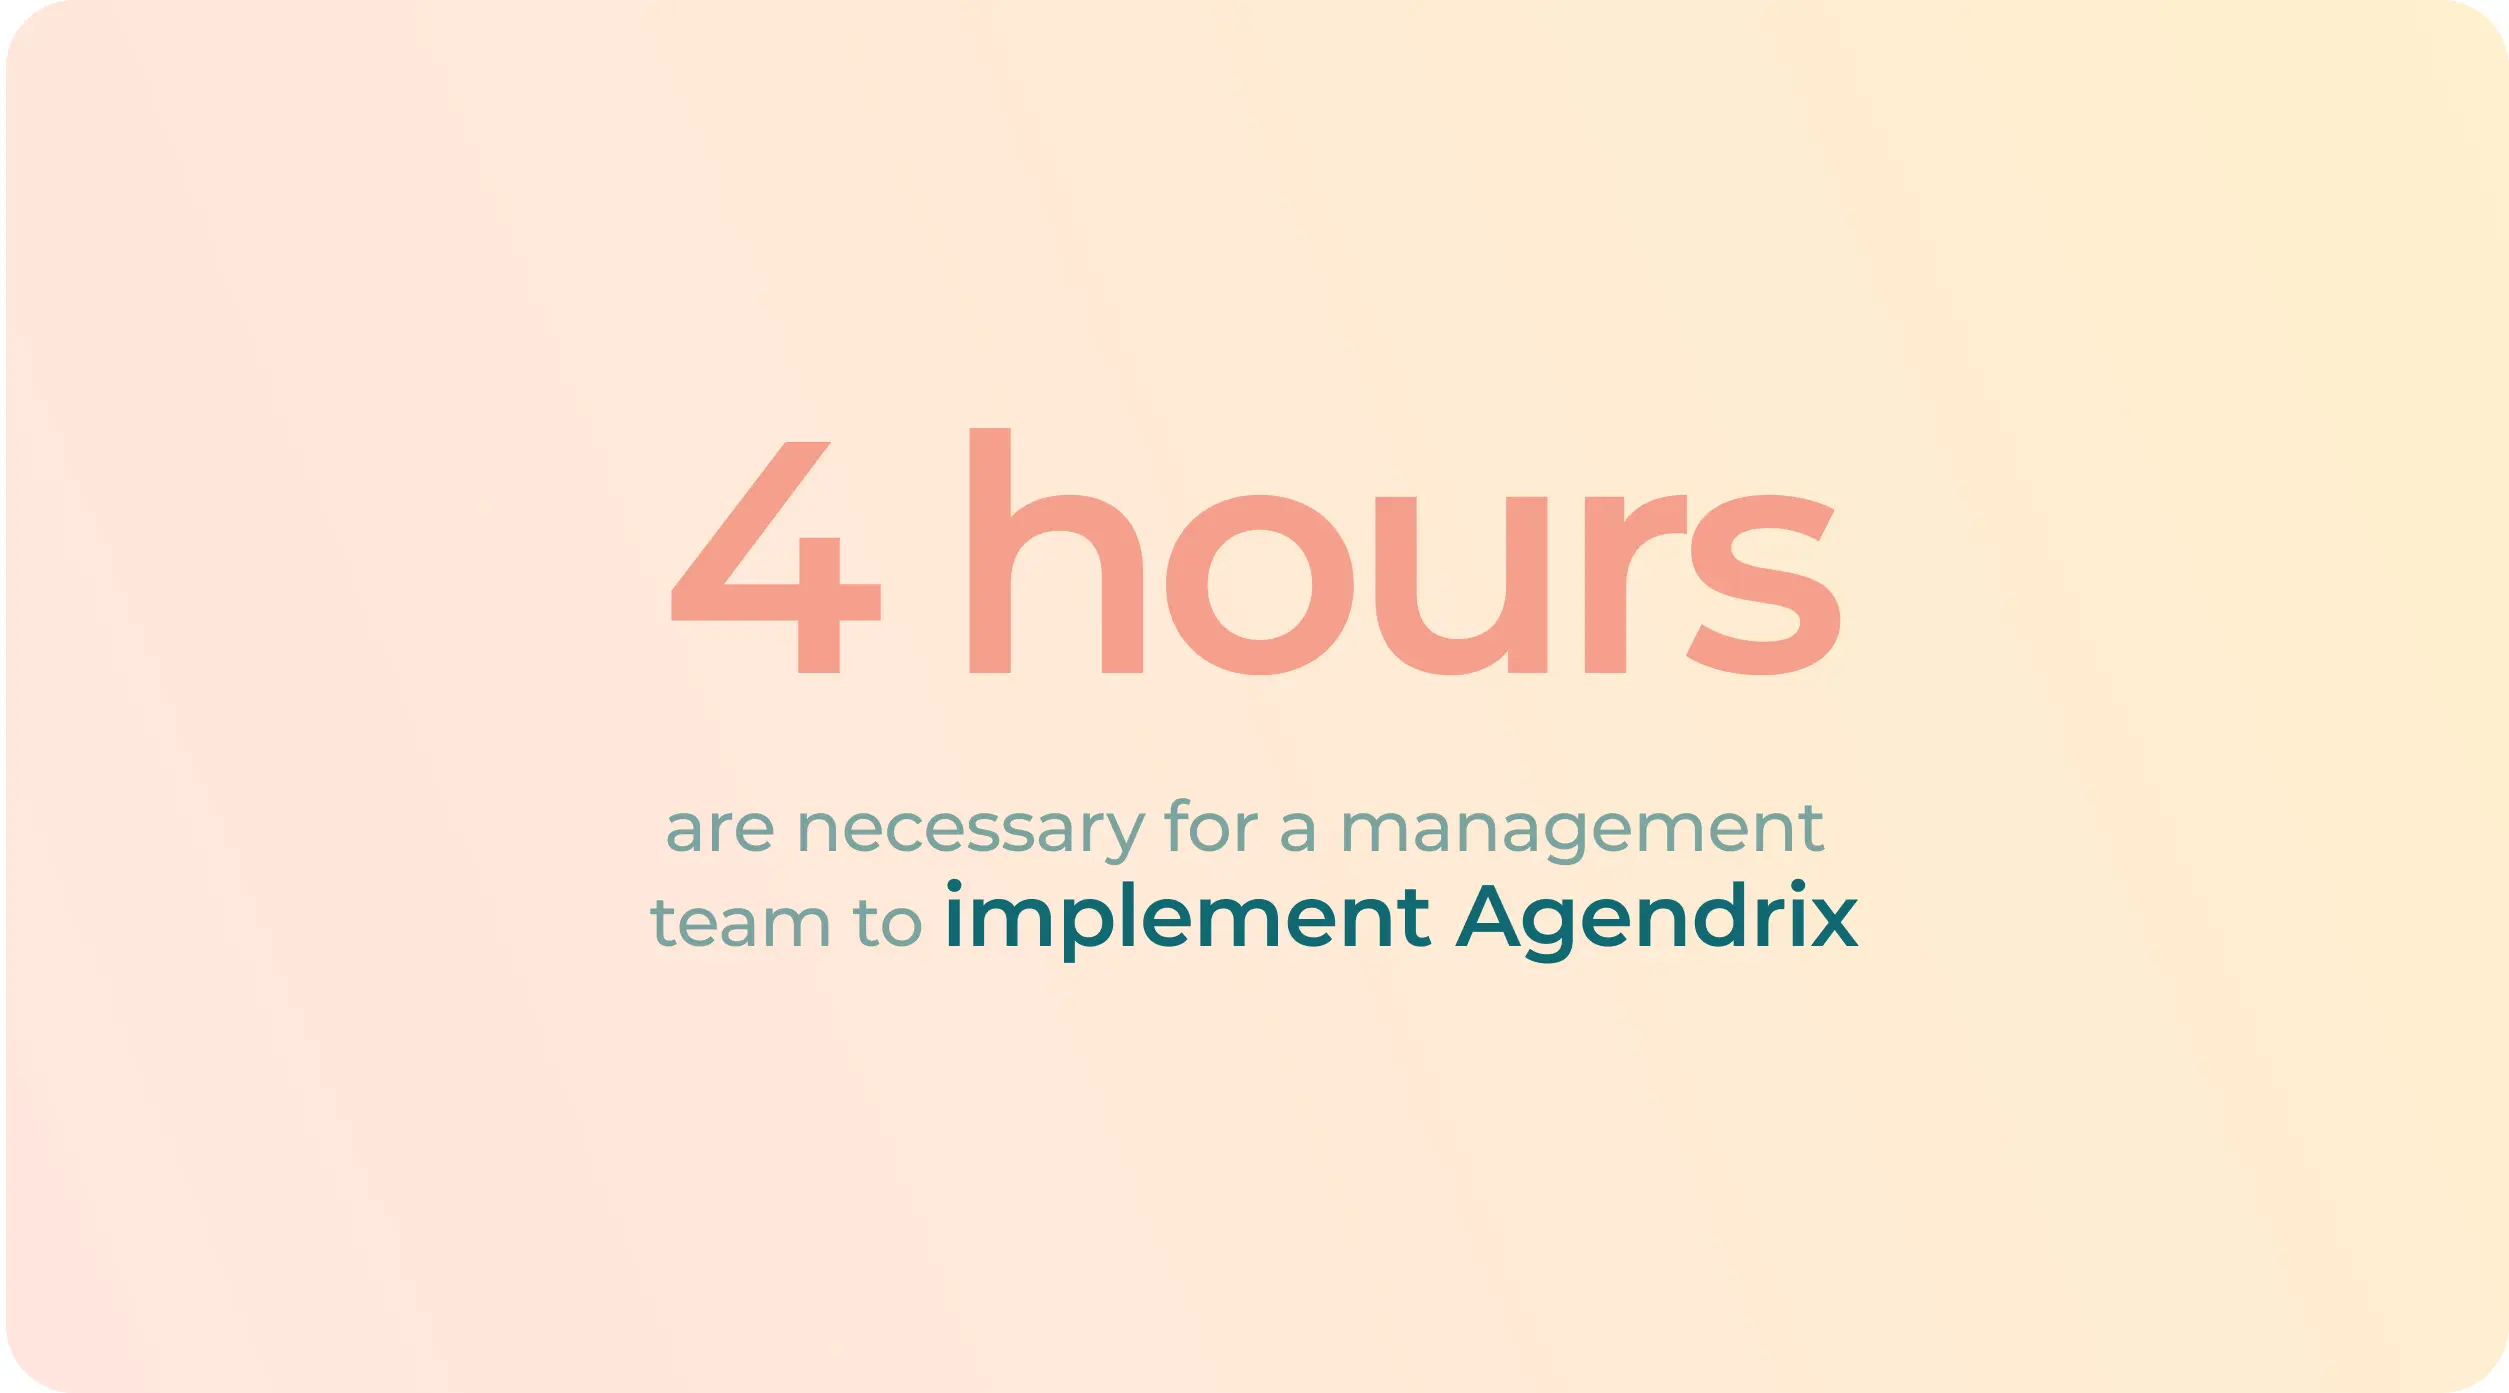 4 hours are necessary for a management team to implement Agendrix